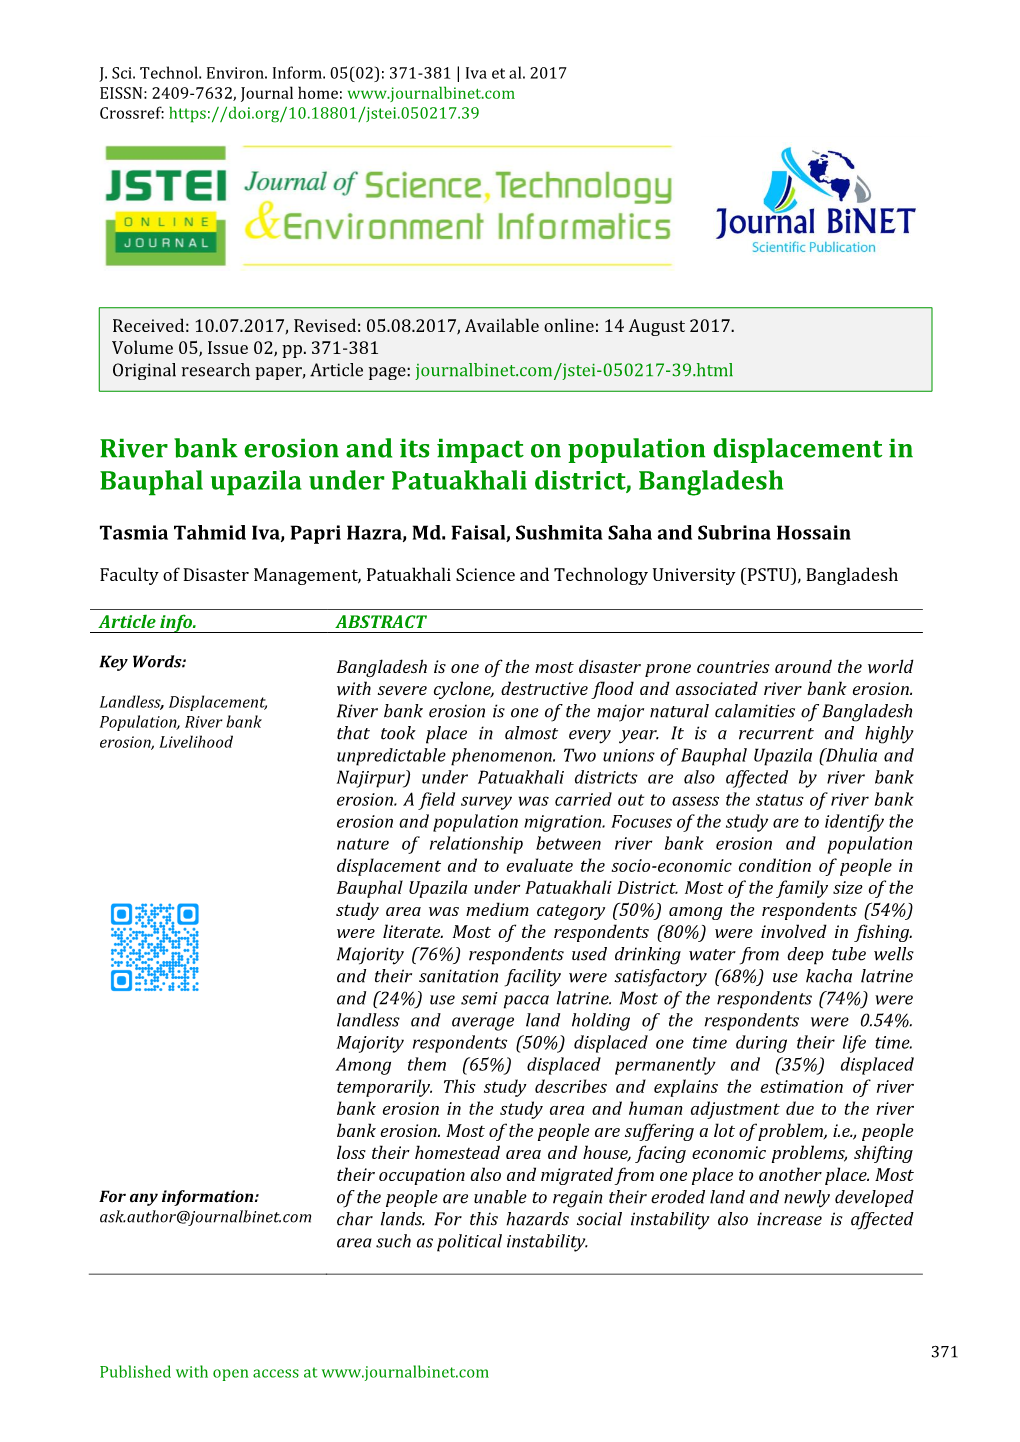 River Bank Erosion and Its Impact on Population Displacement in Bauphal Upazila Under Patuakhali District, Bangladesh